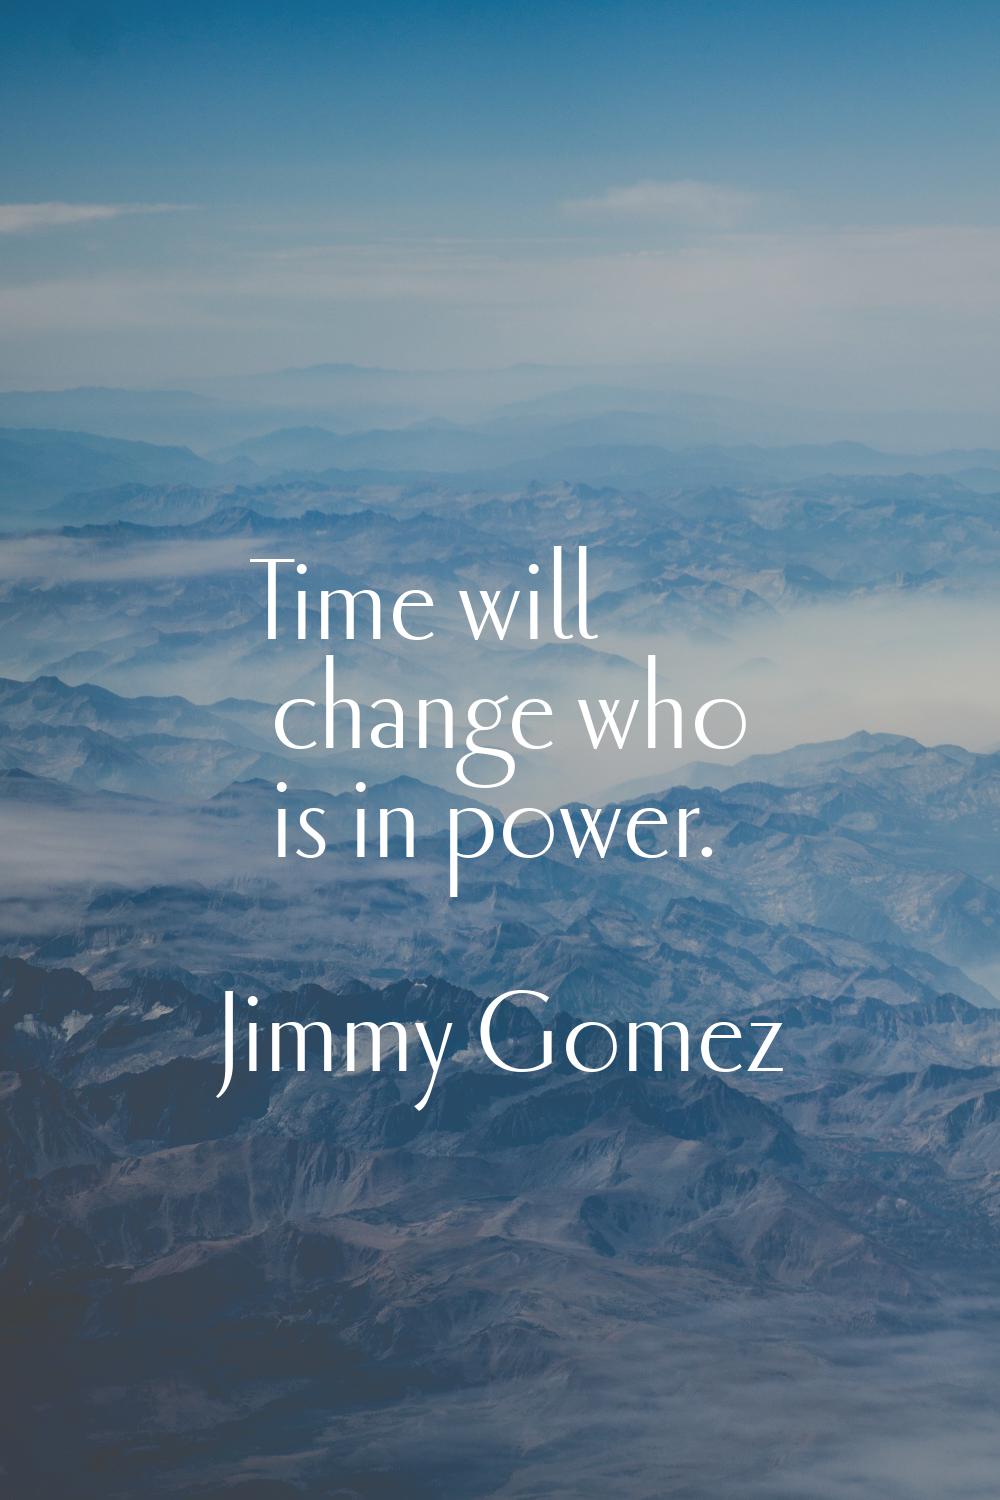 Time will change who is in power.